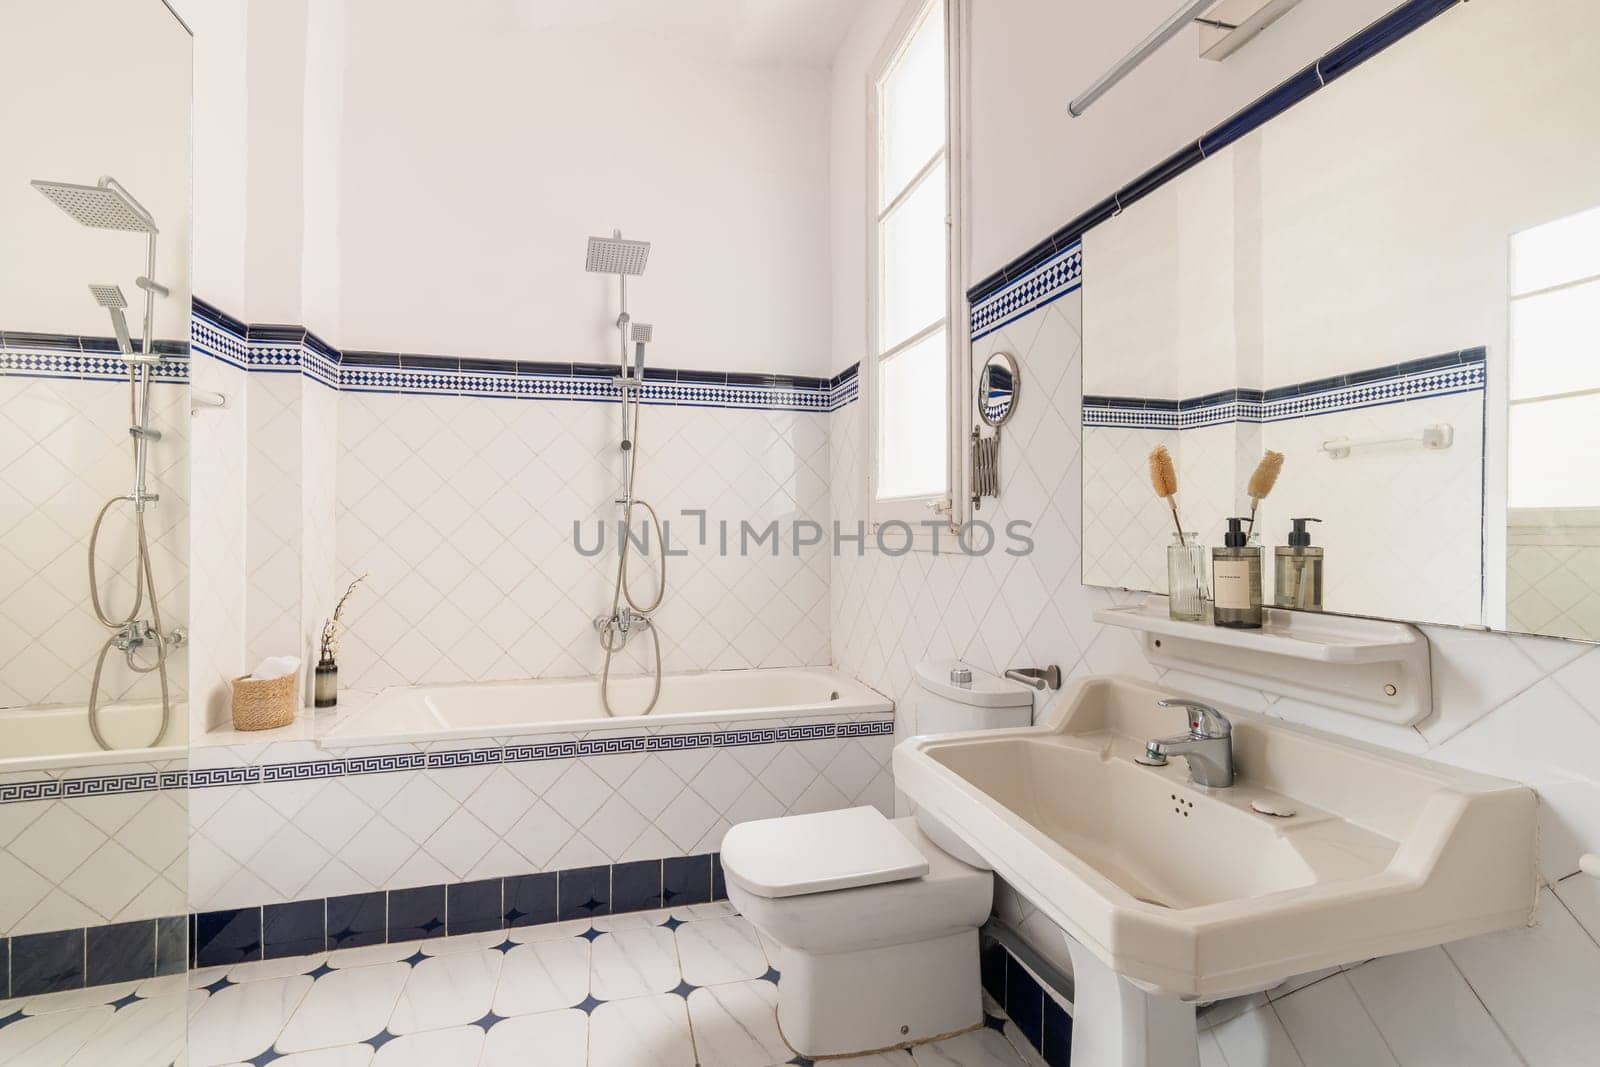 In a beautiful bathroom, modern fixtures and tasteful decor create an inviting atmosphere. The room features a bathtub, shower, sink, and stylish interior design.